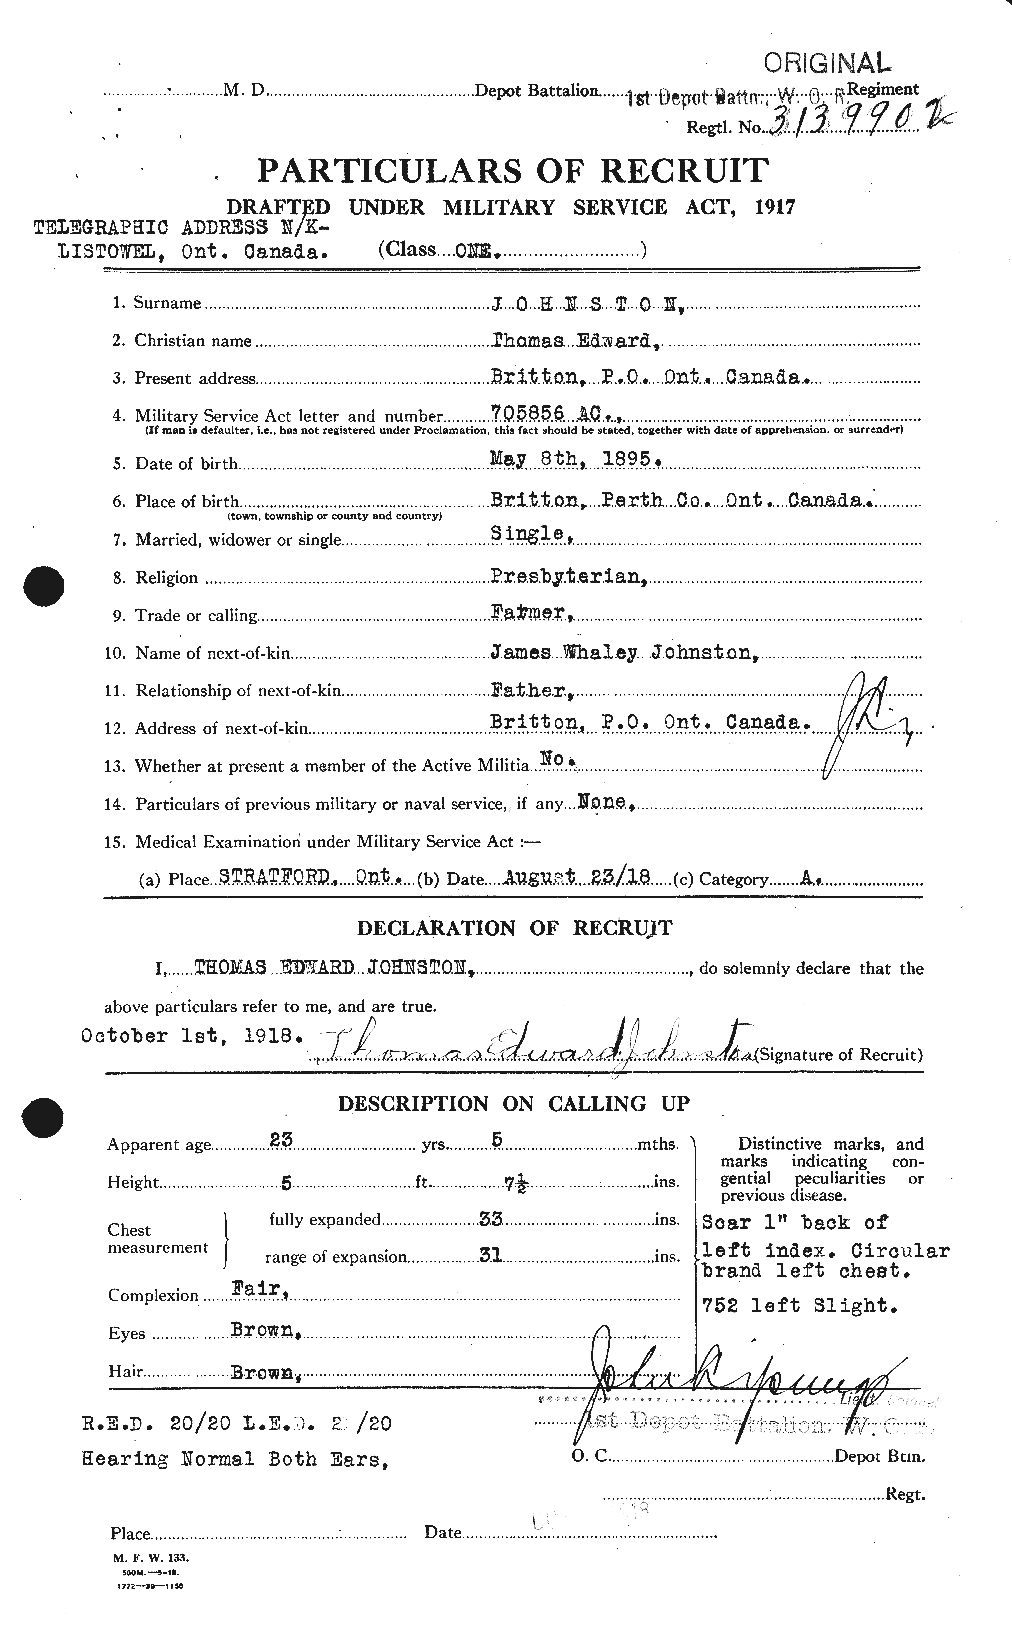 Personnel Records of the First World War - CEF 427164a